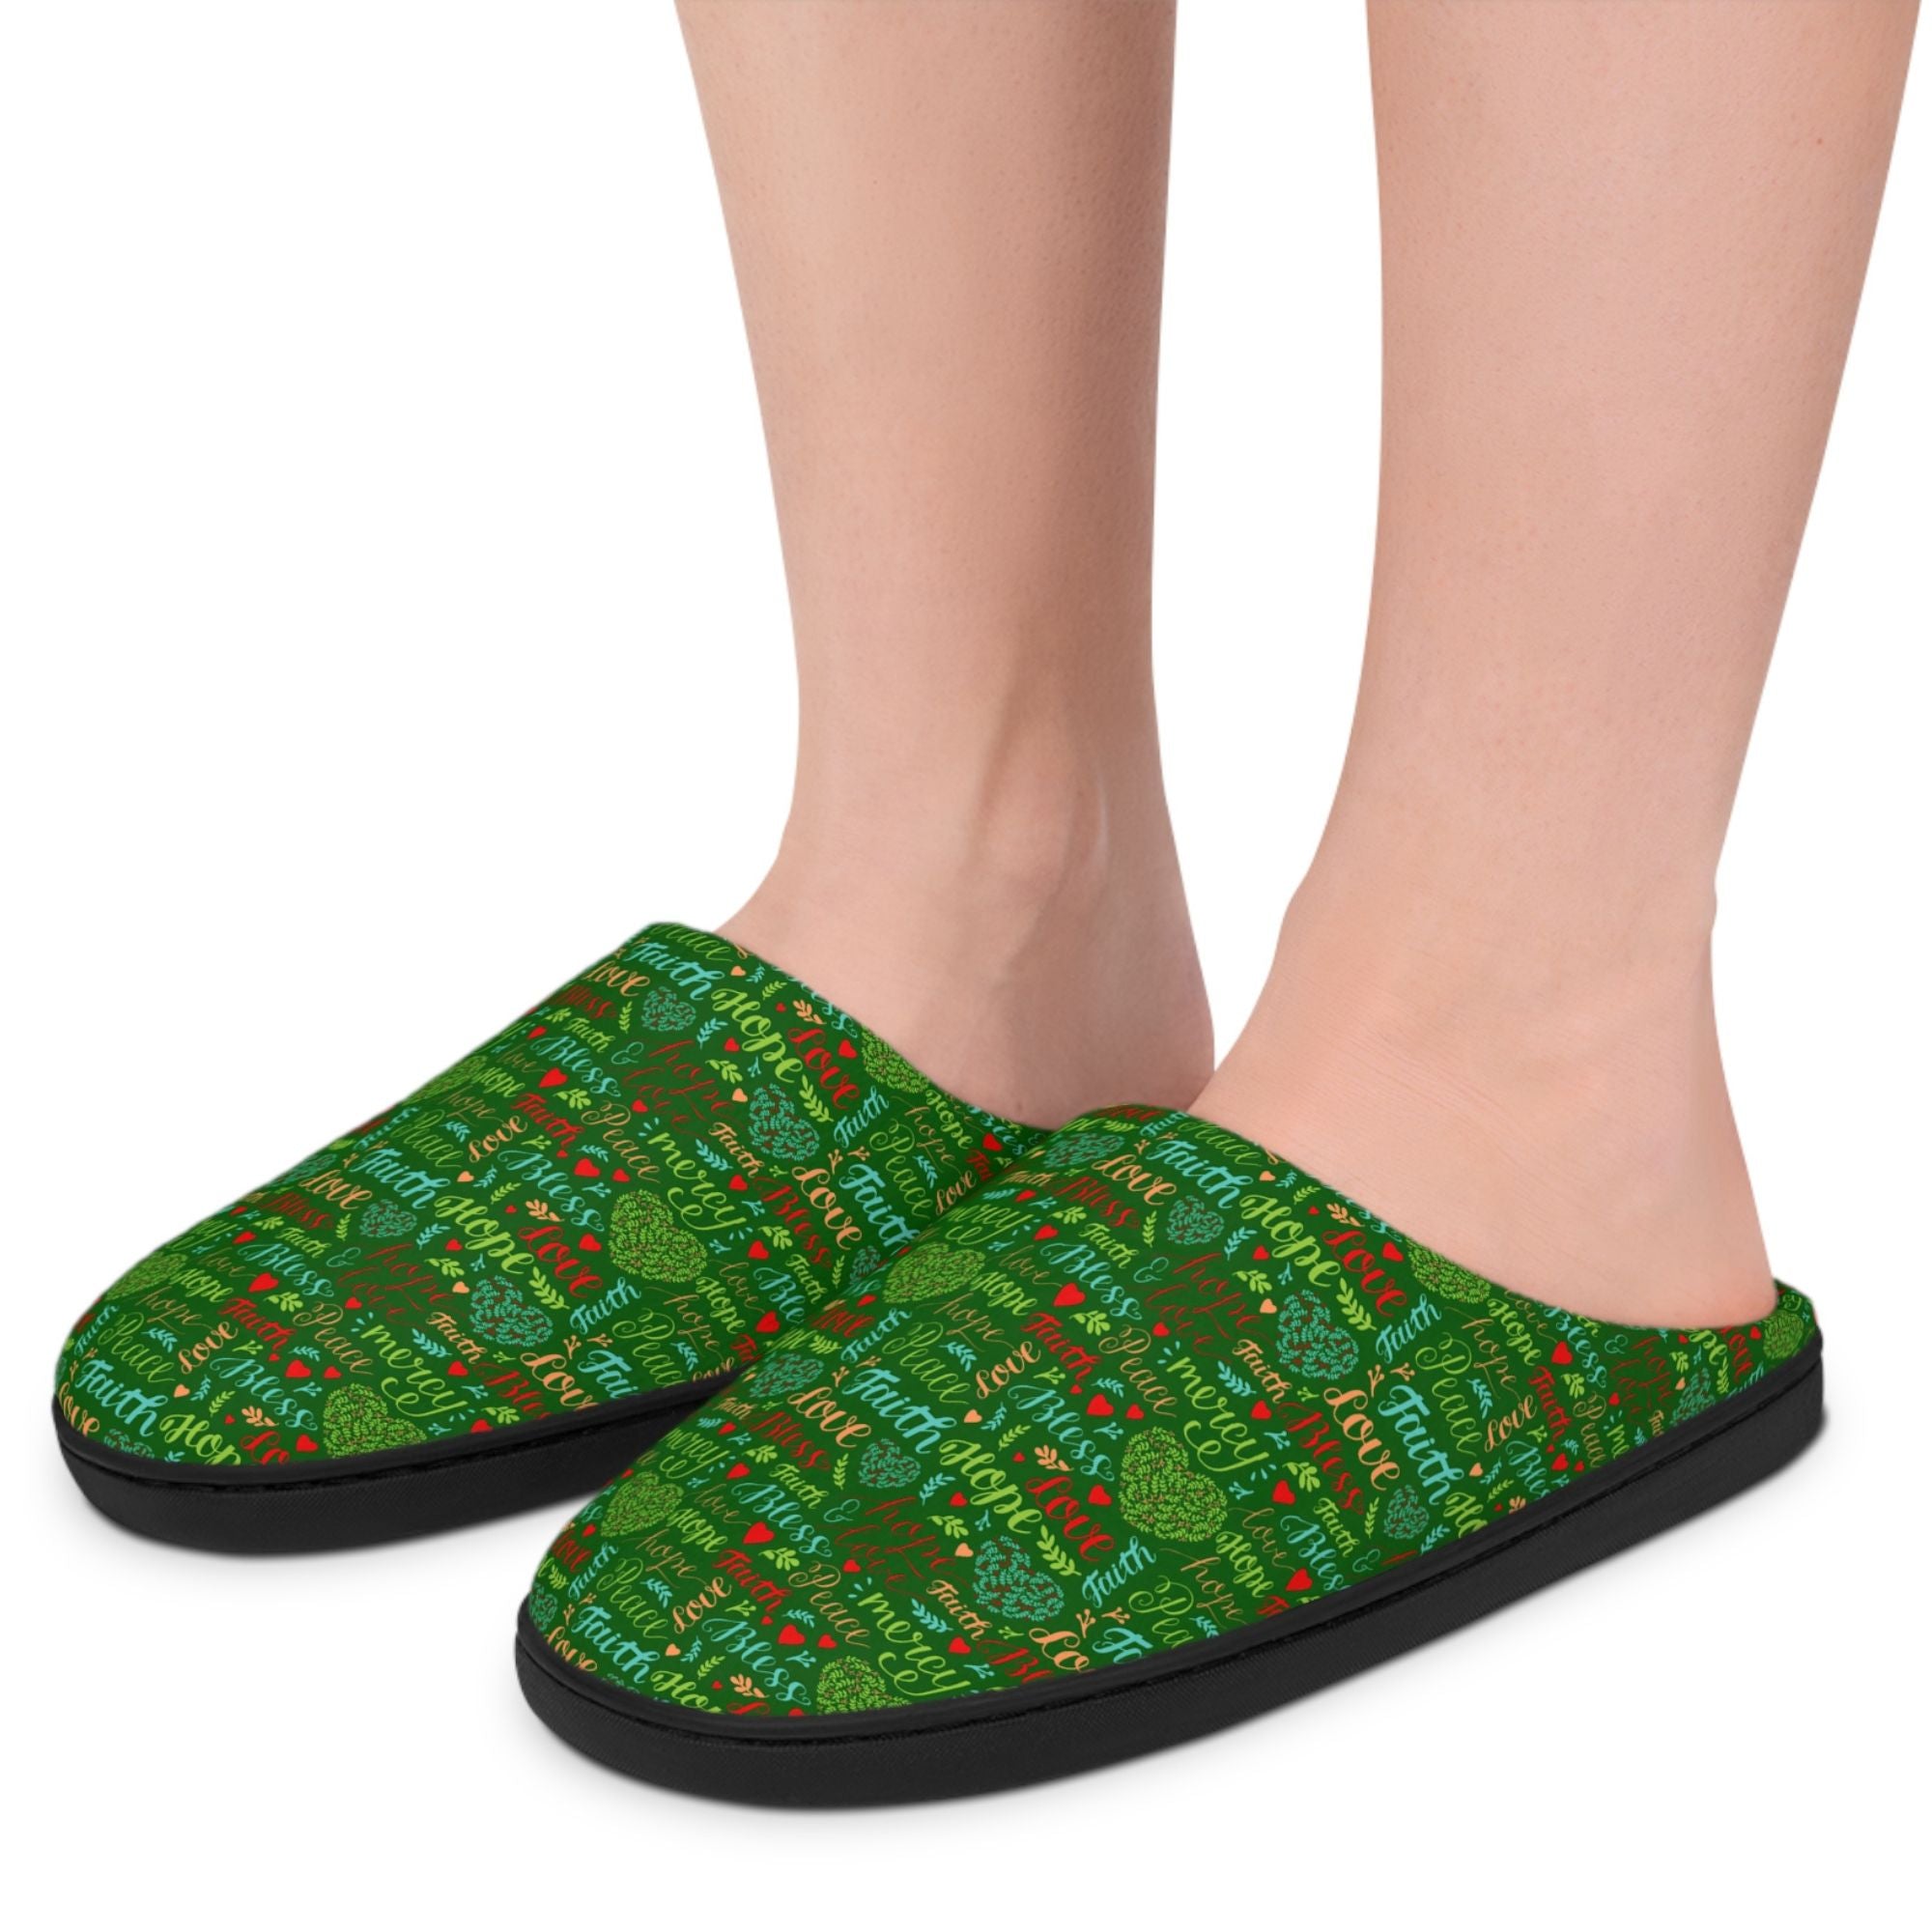 Mercy Peace Hope & Love Women's Green Indoor Slippers - Matching Pajama Set and Lounge / Pajama Pants Available Size: US 7 - 8 Color: Black sole Jesus Passion Apparel